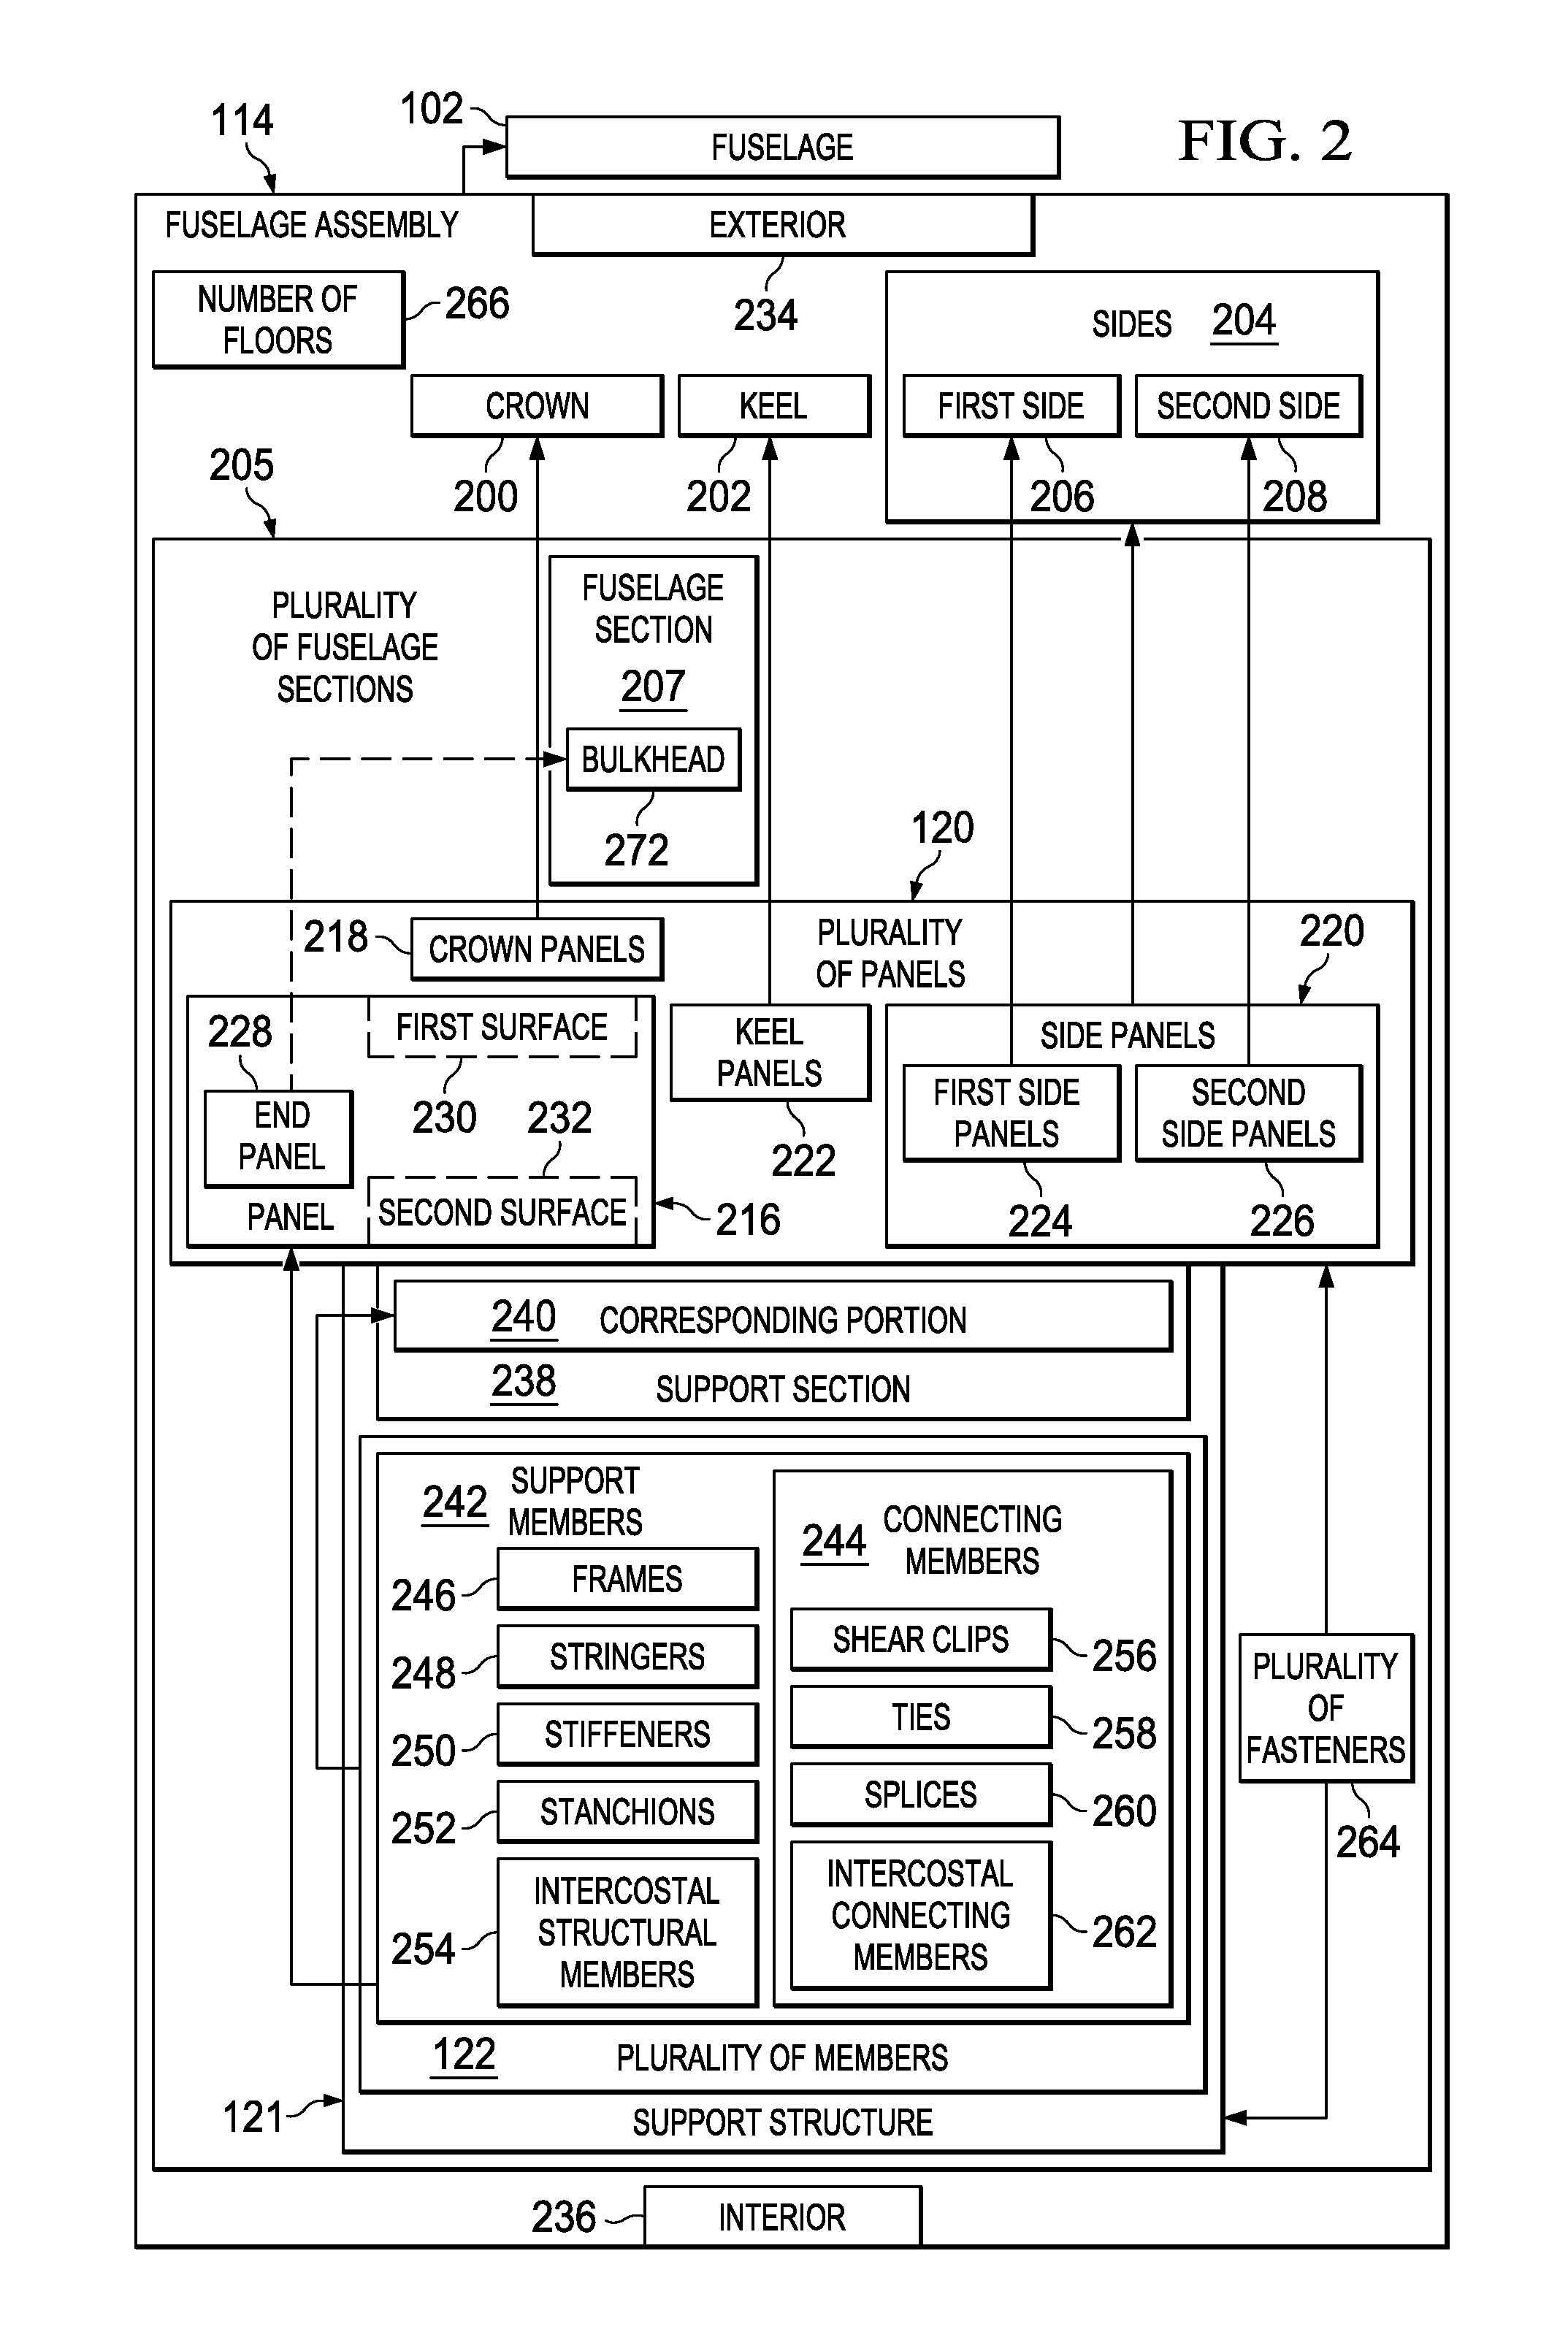 Mobile platforms for performing operations along an exterior of a fuselage assembly